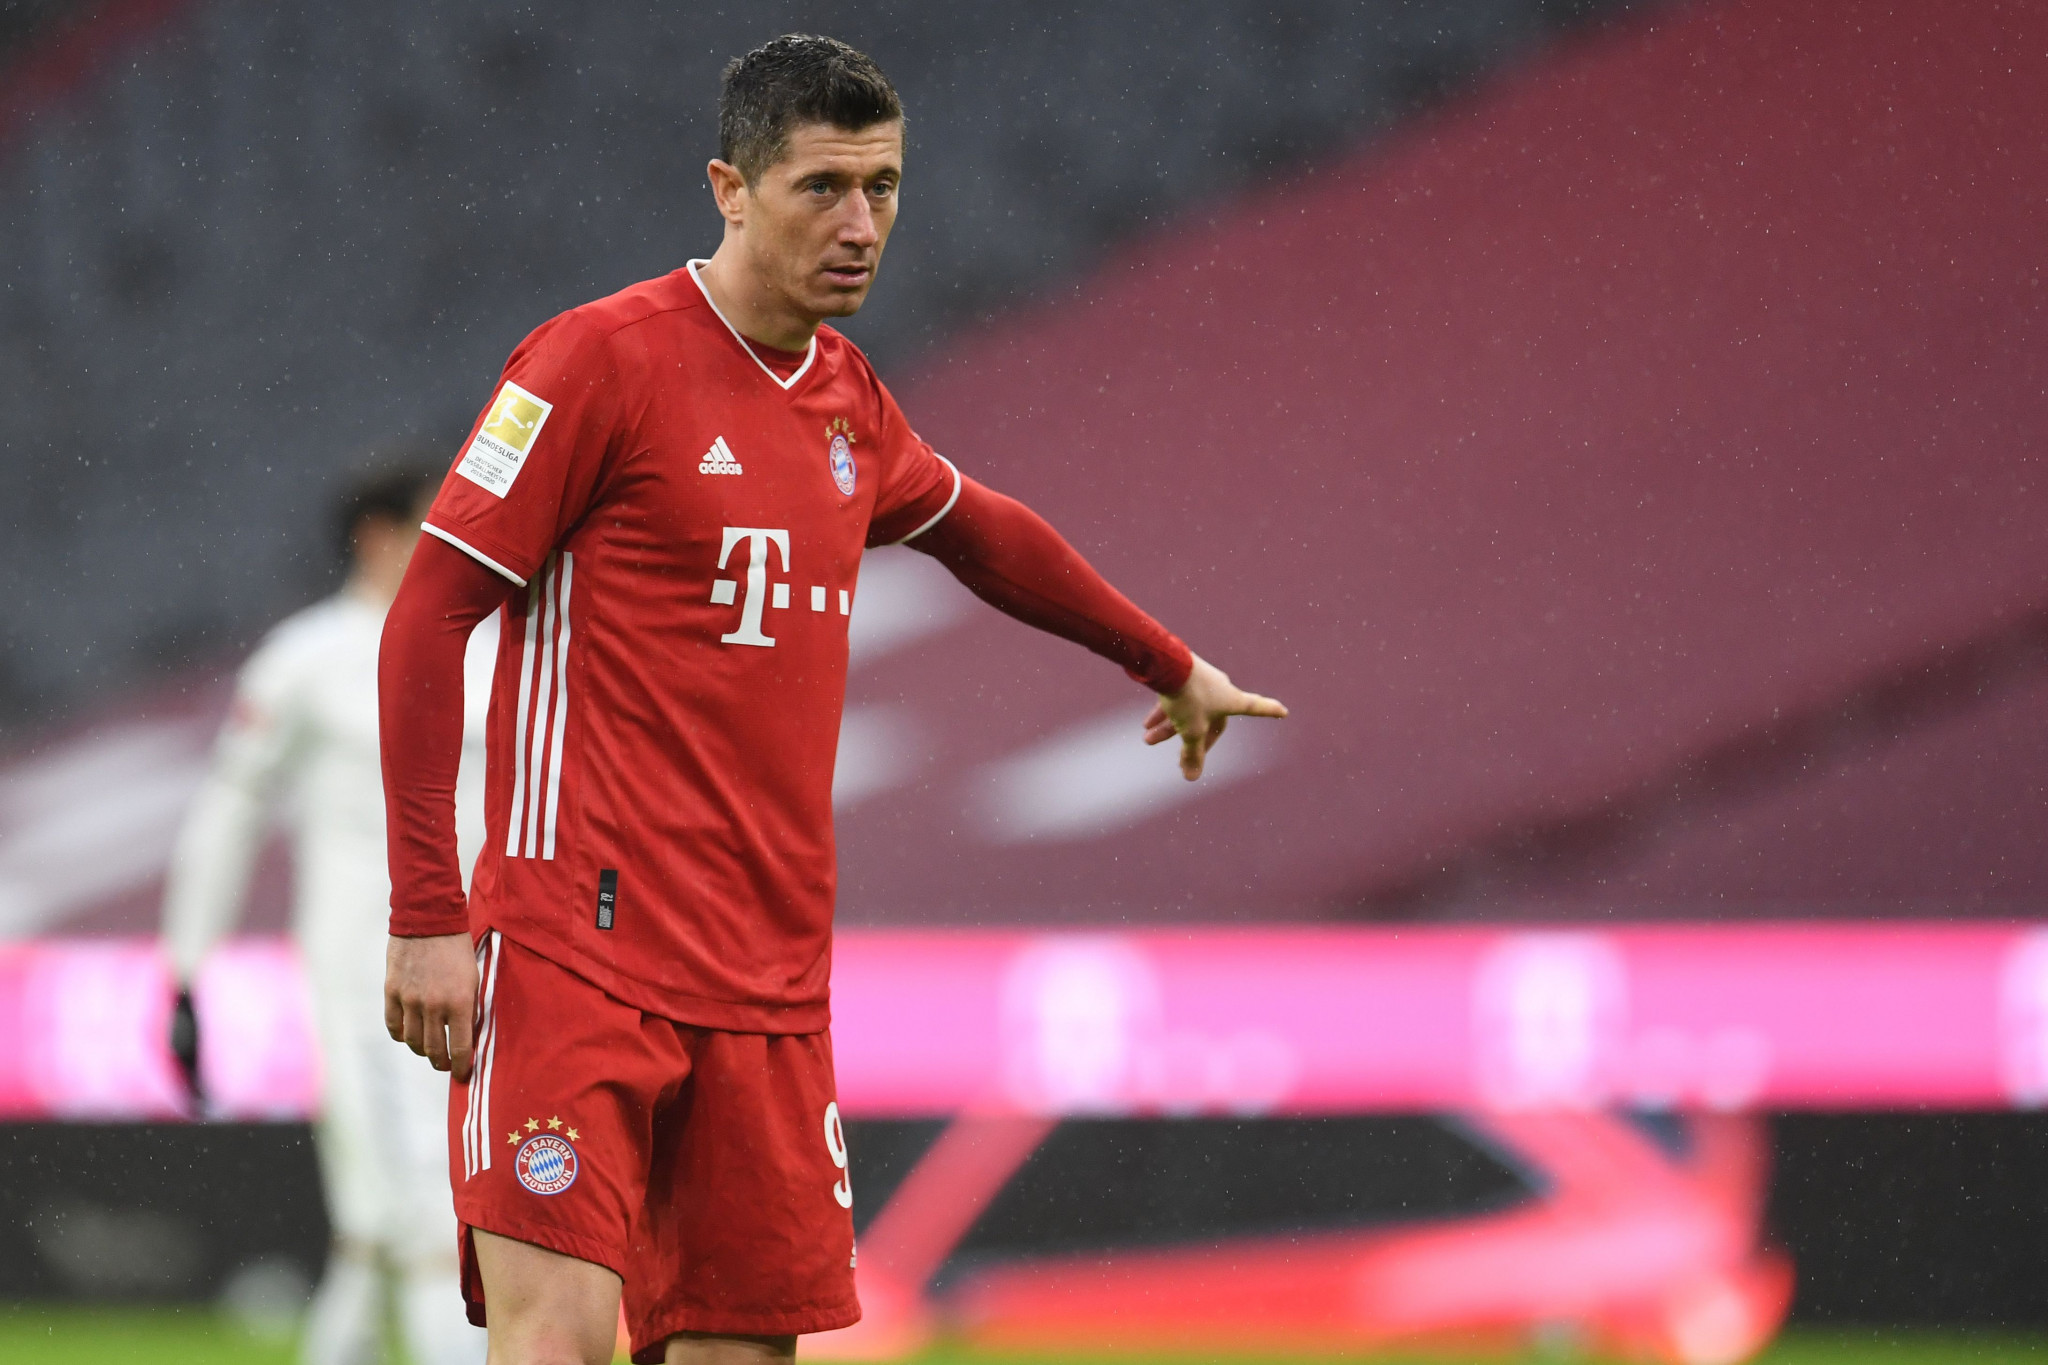 Robert Lewandowski will be a threat for Bayern Munich during the FIFA Club World Cup ©Getty Images